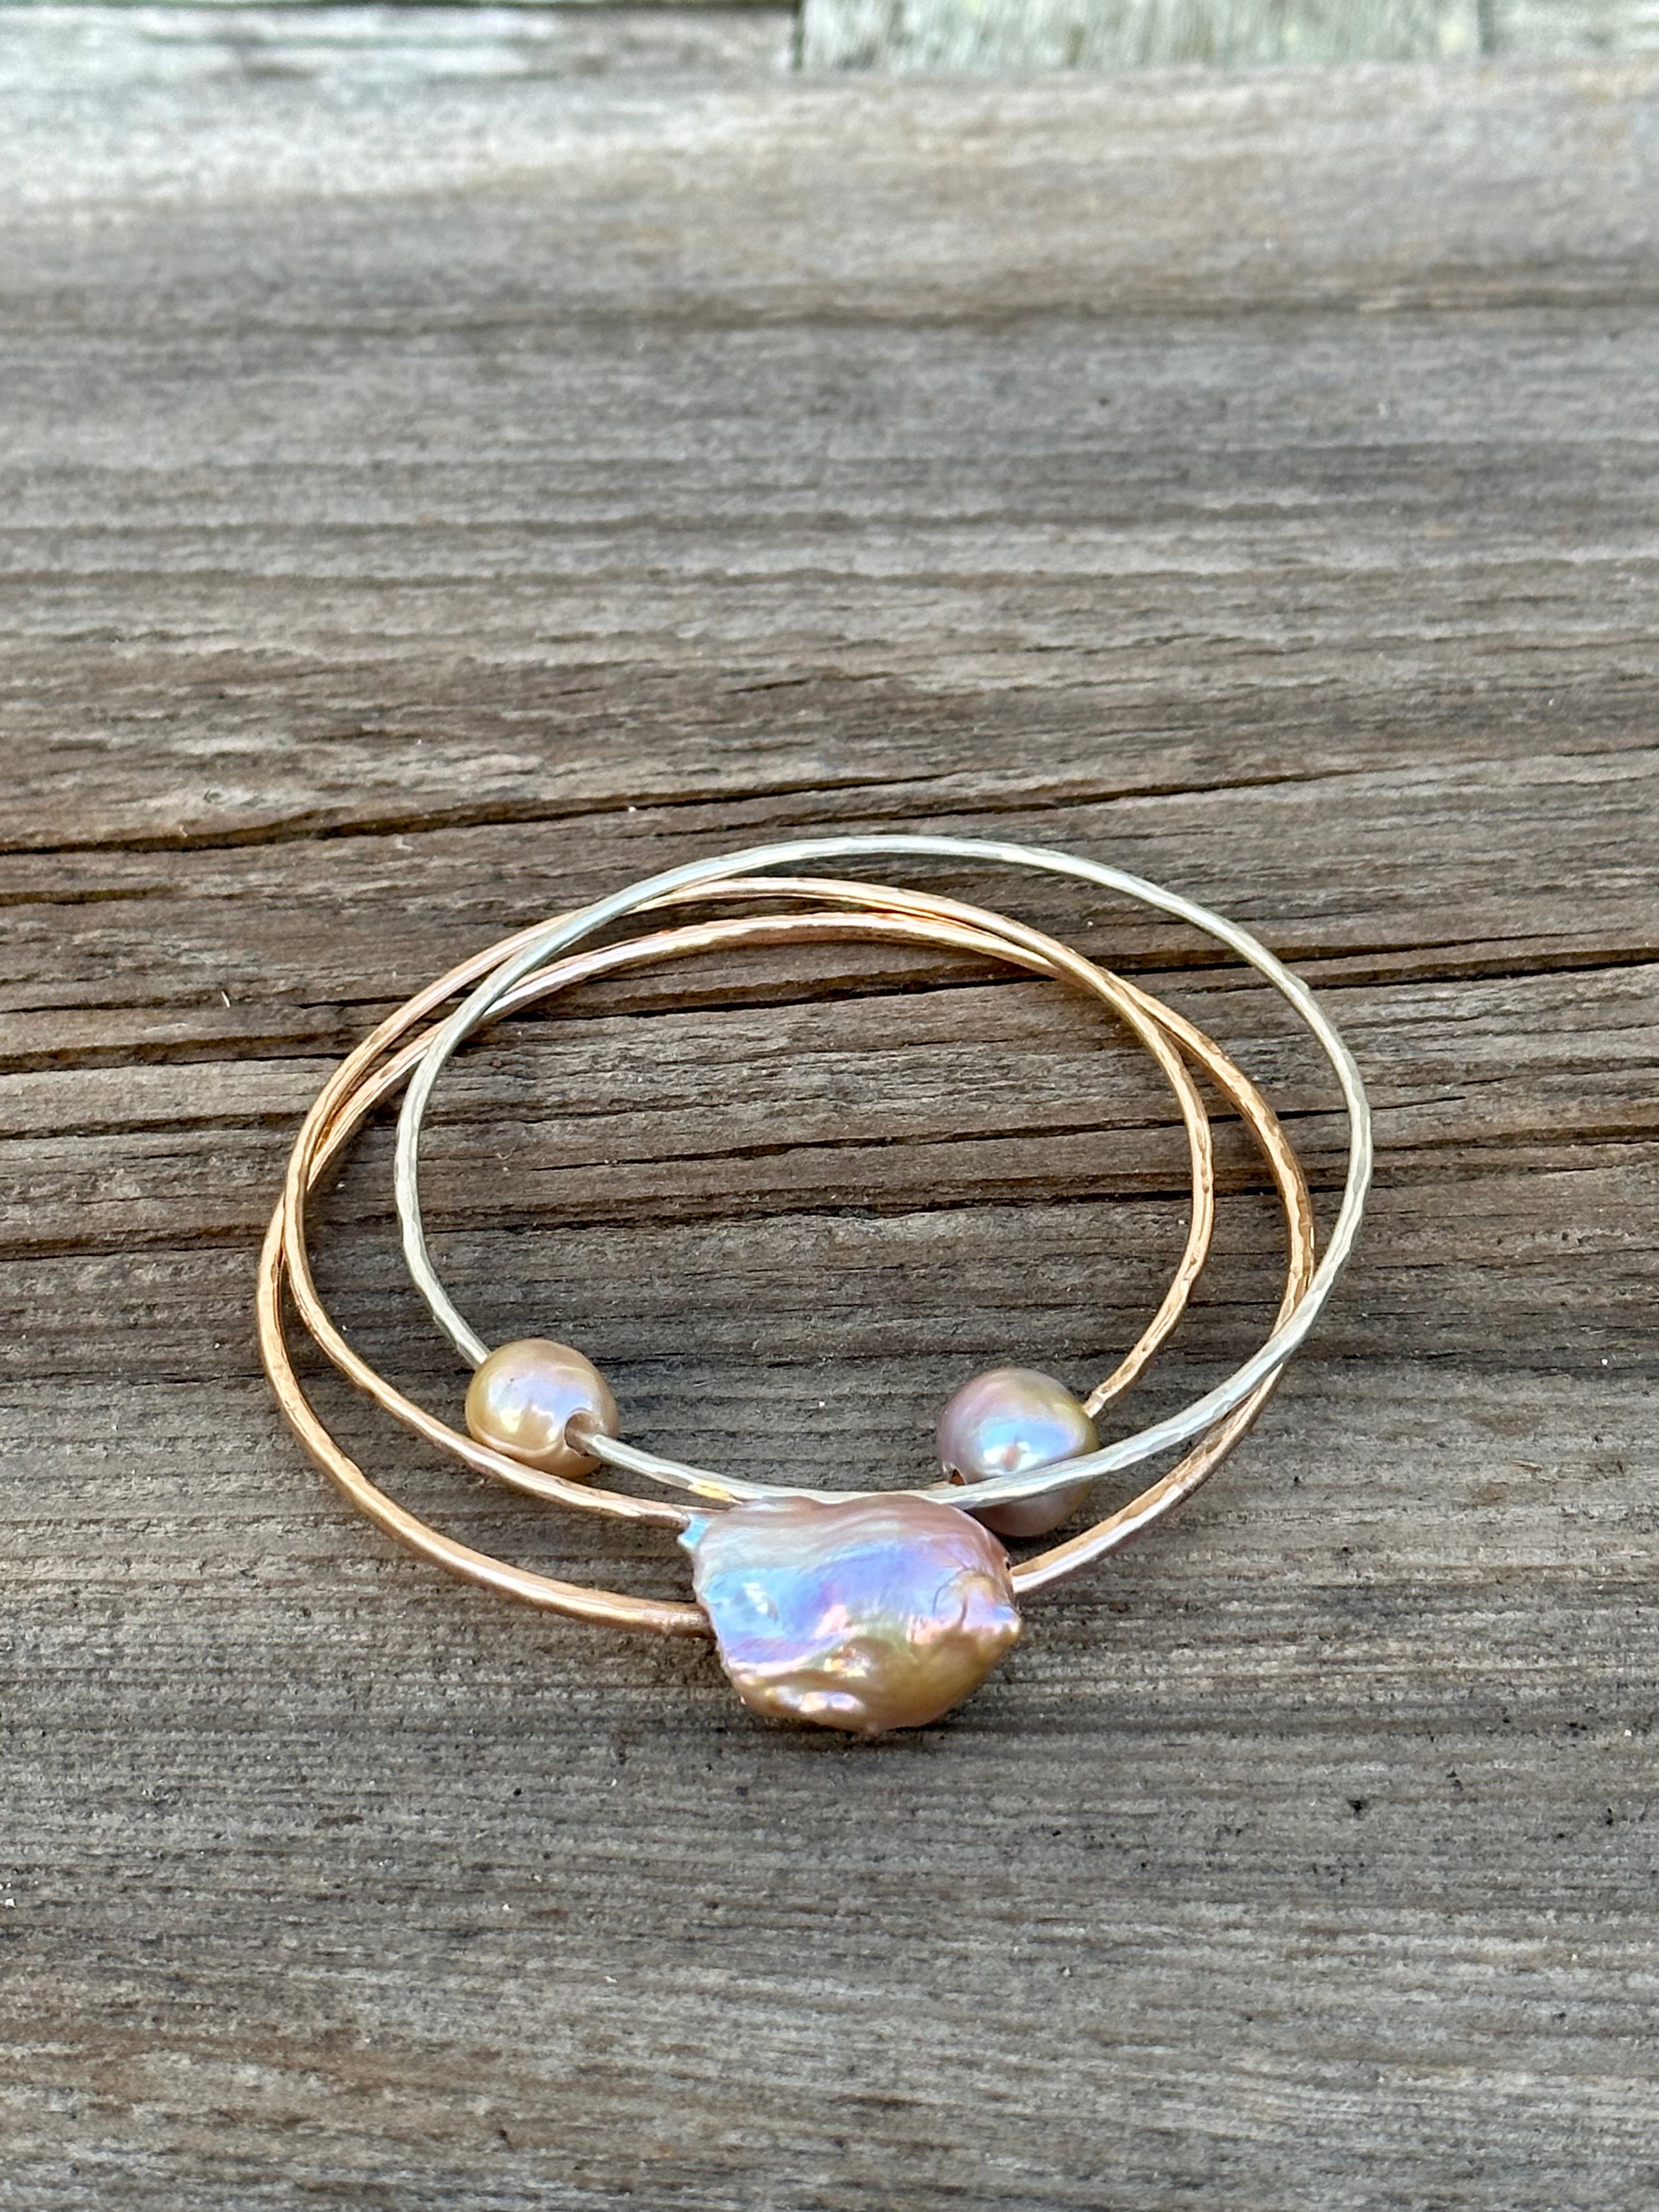 Three gold bangles one with a large oddly shaped fireball pearl in light pink and two with smaller pink pearls on a wooden background.